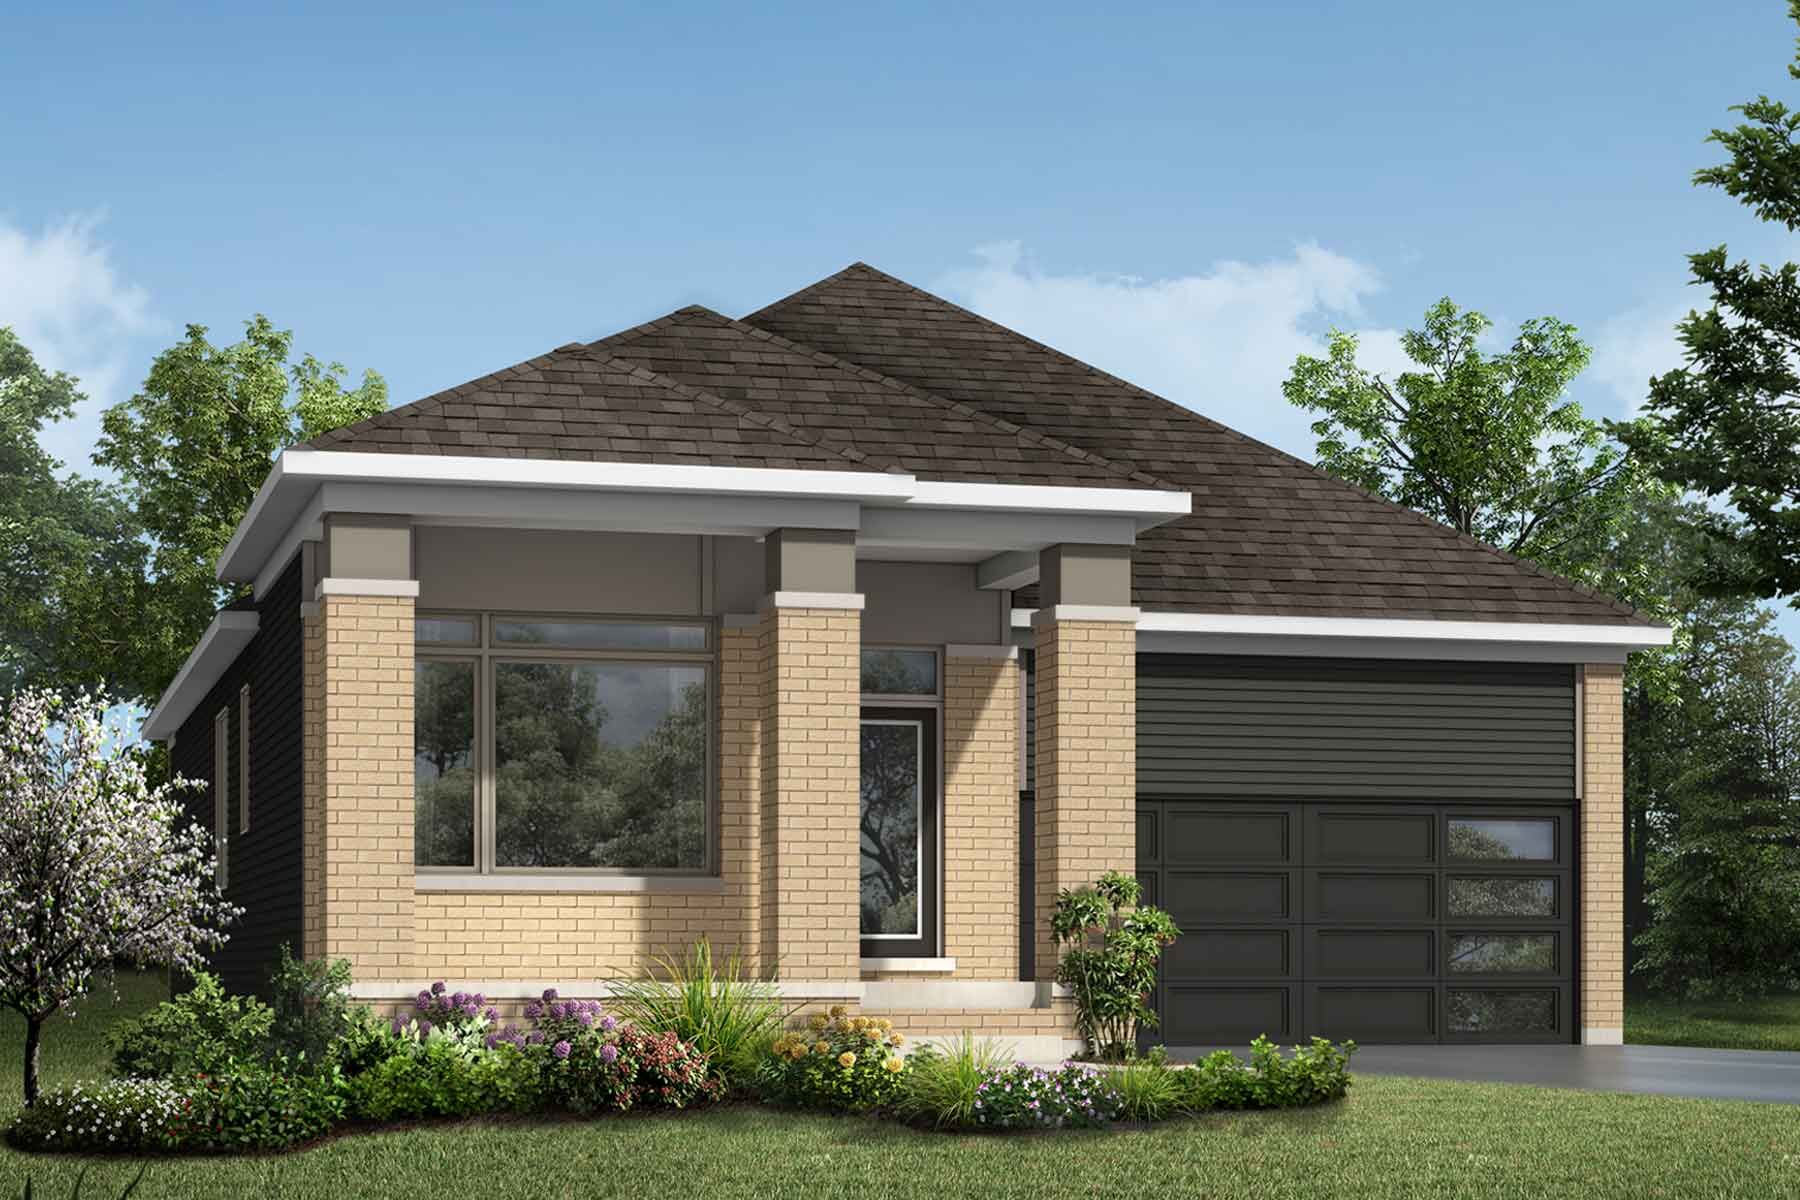 A Transitional style detached home with a double car garage.